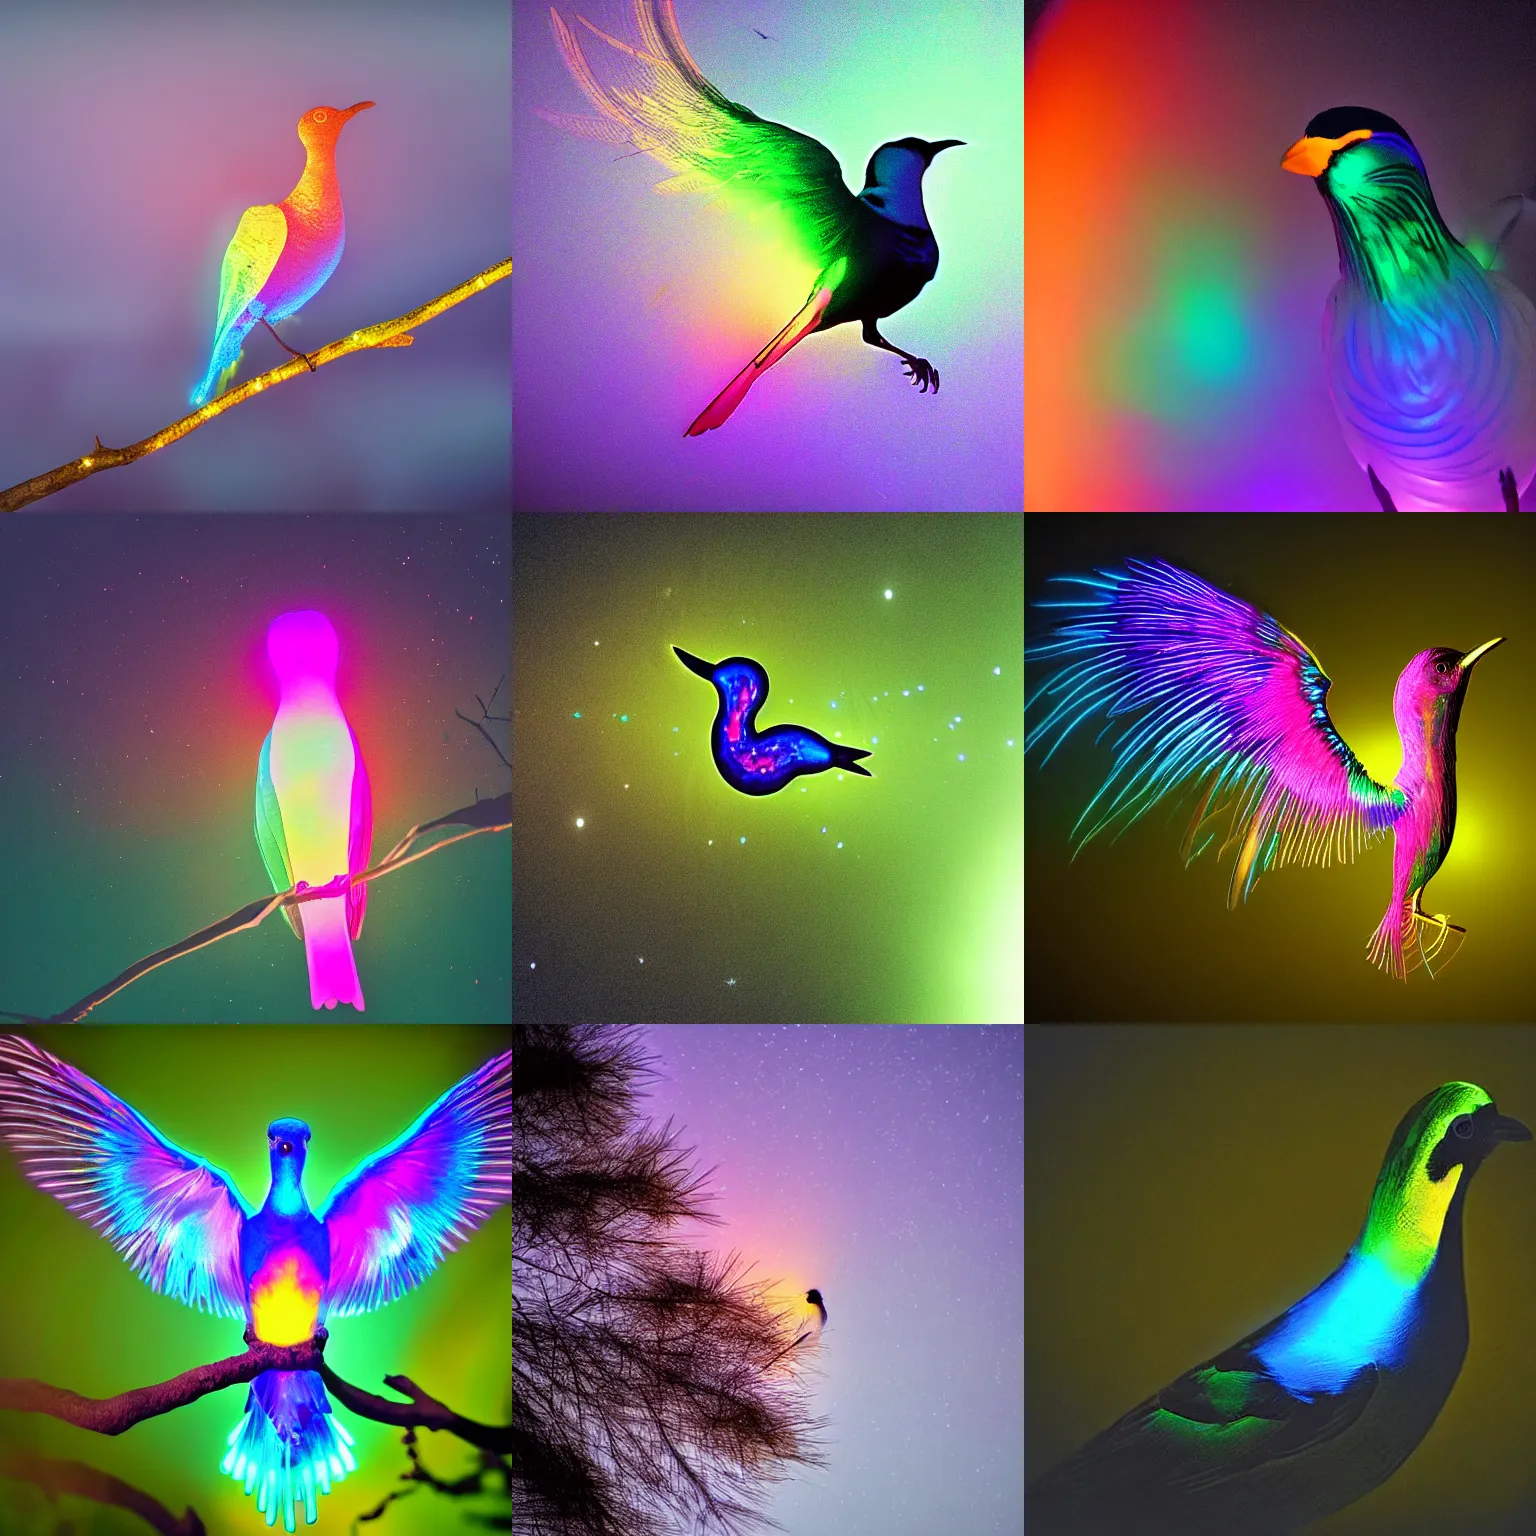 Prompt: Iridescent glowing bird, nature photography at night